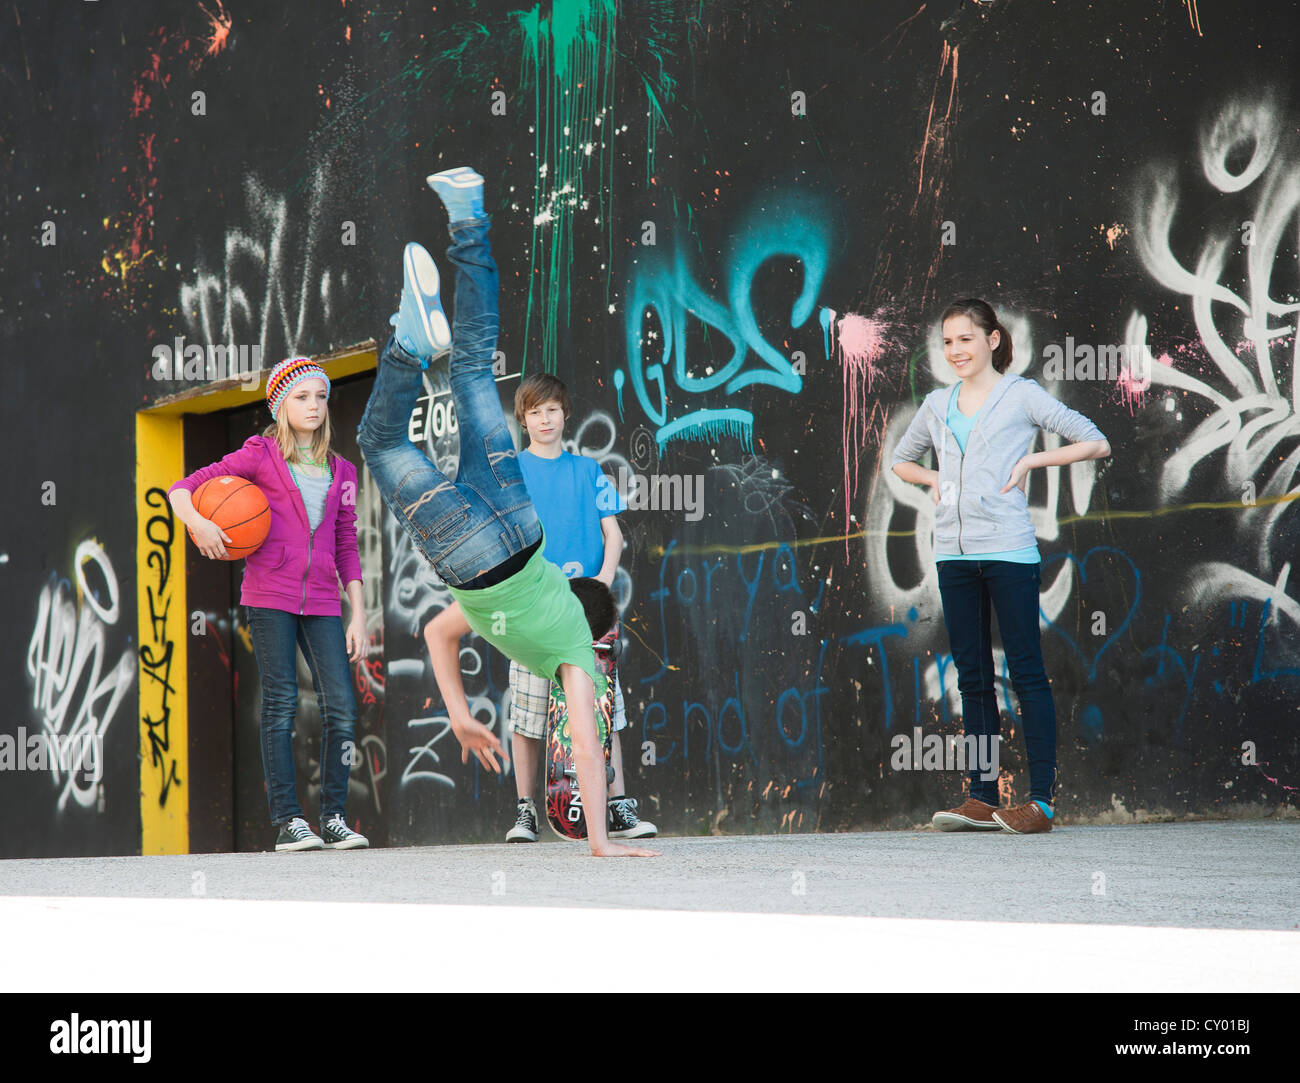 Teenagers standing in front of a wall with graffiti Stock Photo